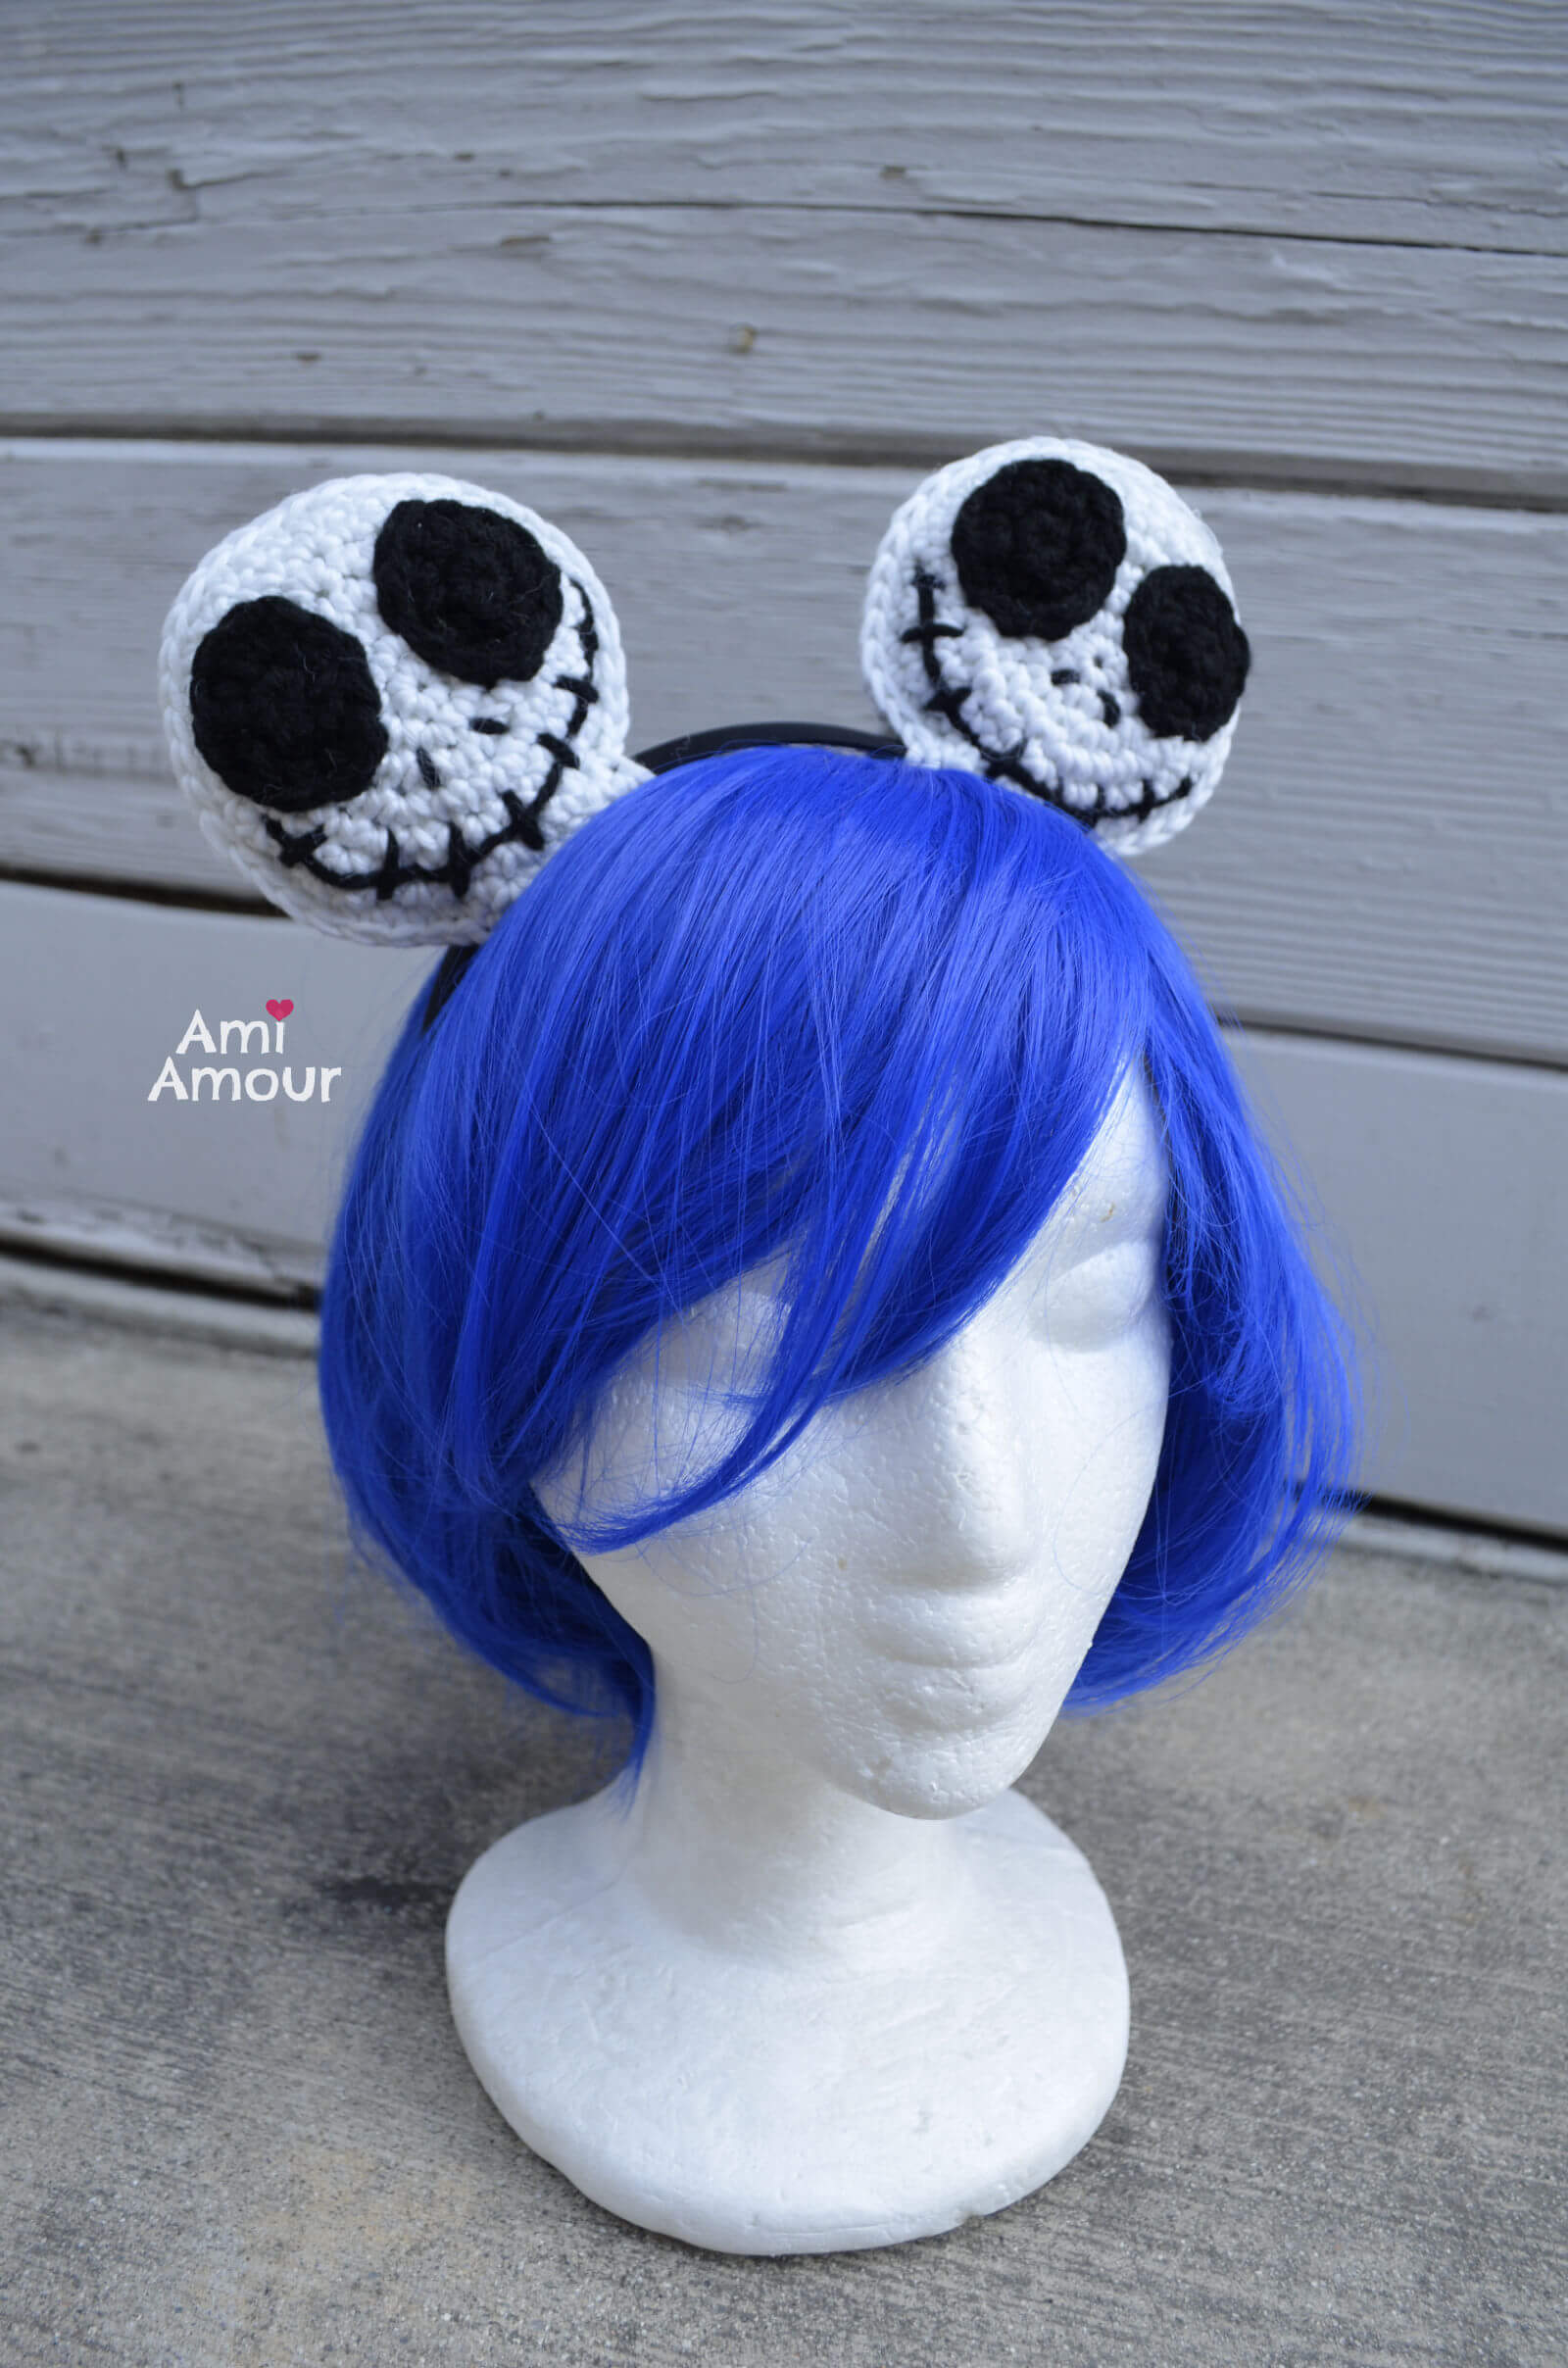 Jack Ears on Mannequin Head with Blue Wig